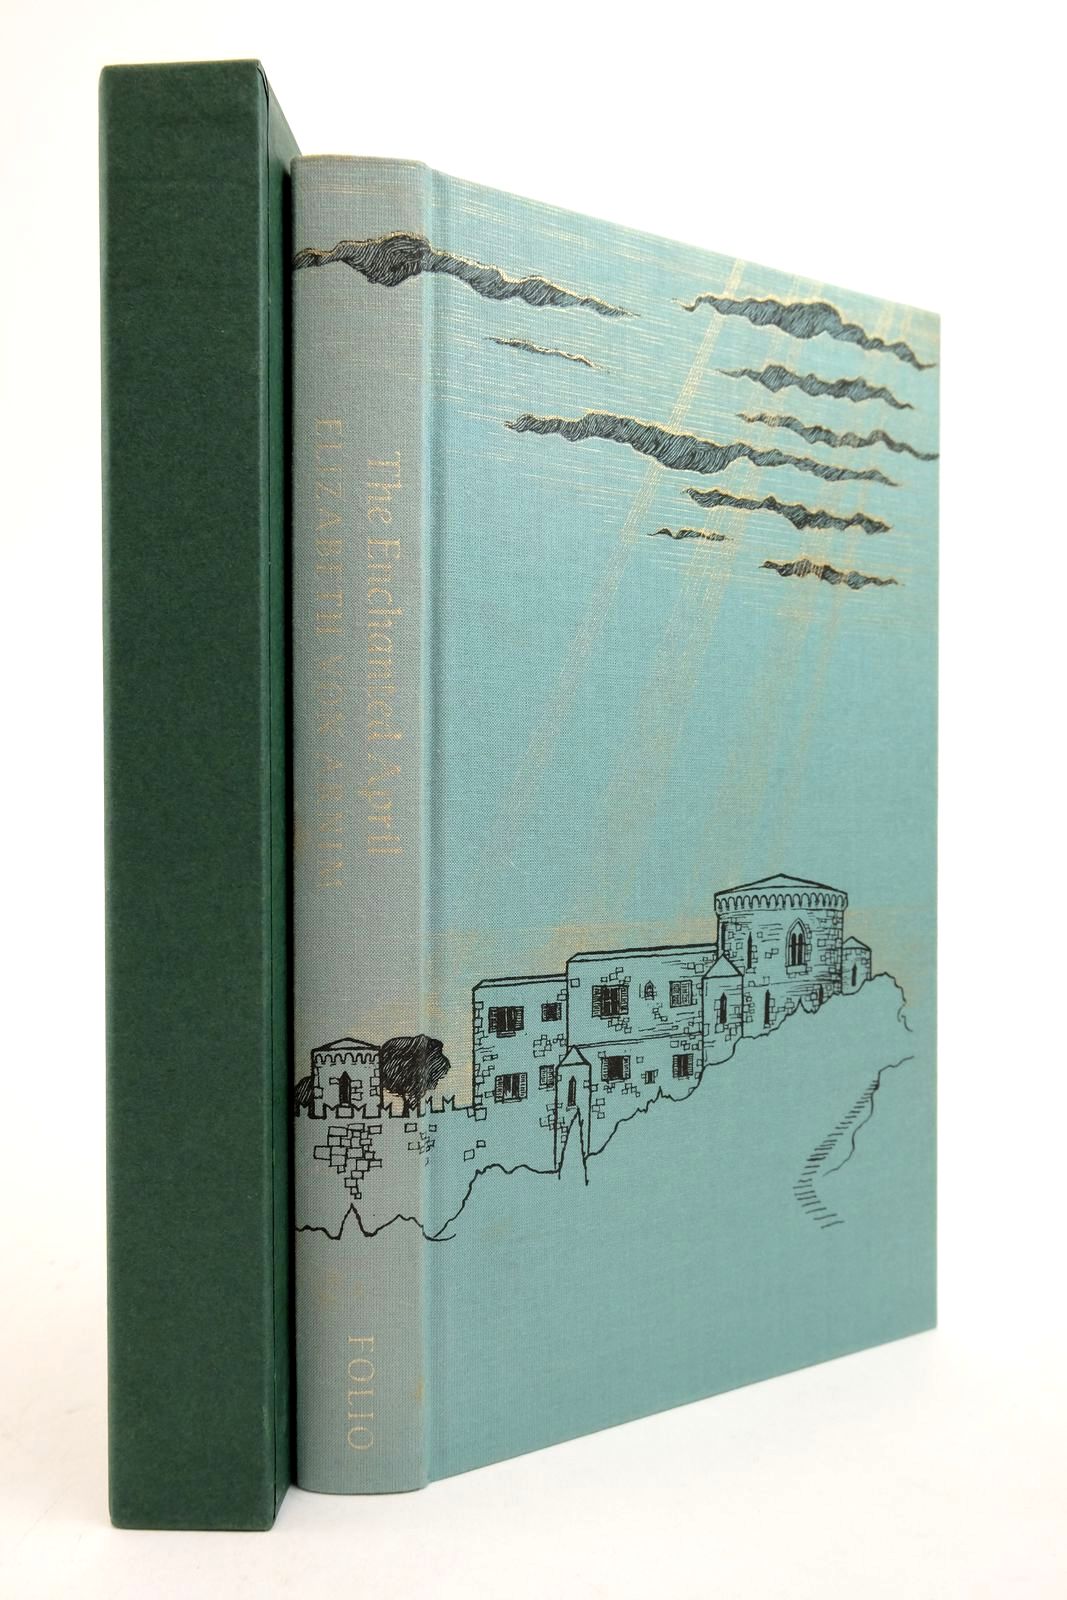 Photo of THE ENCHANTED APRIL written by Von Arnim, Elizabeth Howard, Elizabeth Jane illustrated by McFarlane, Debra published by Folio Society (STOCK CODE: 2139226)  for sale by Stella & Rose's Books